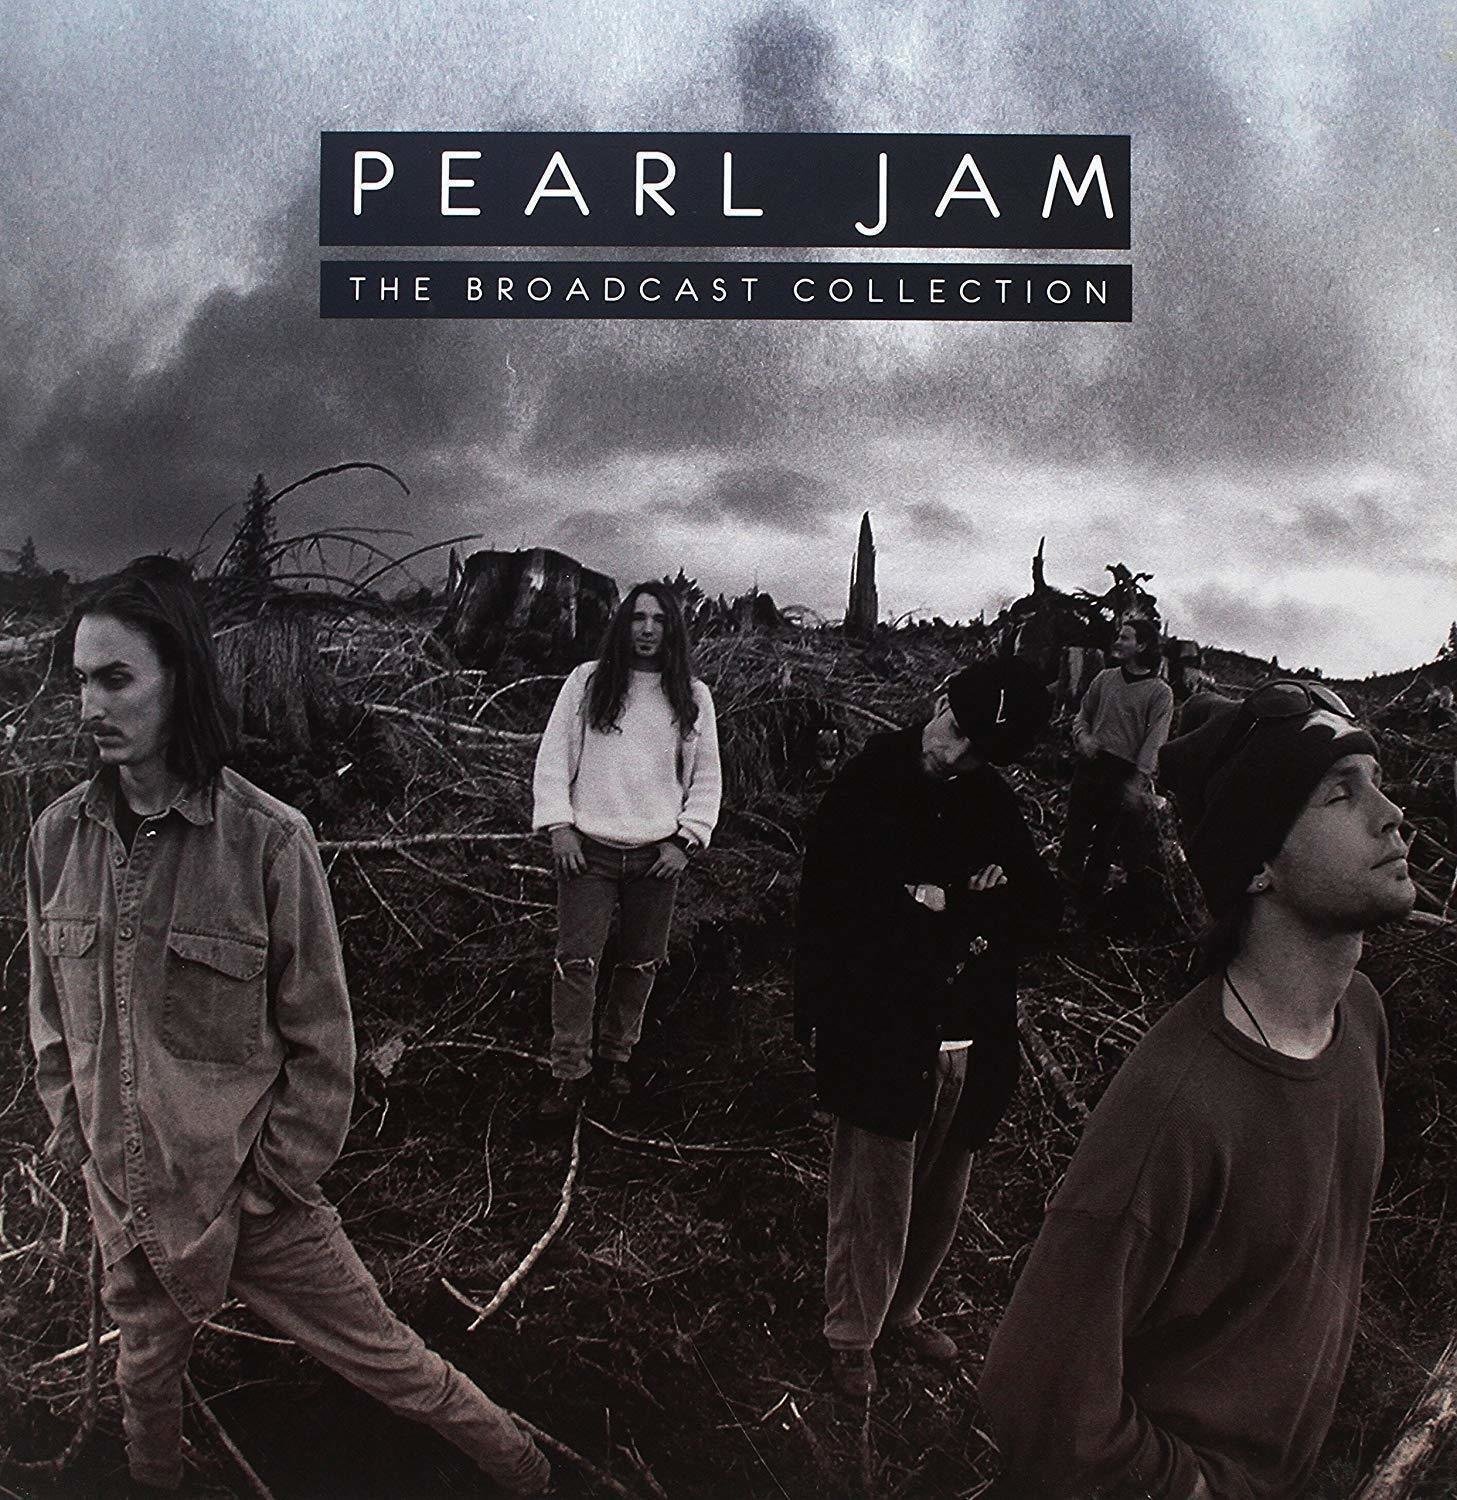 Vinyl Record Pearl Jam - The Broadcast Collection (3 LP)